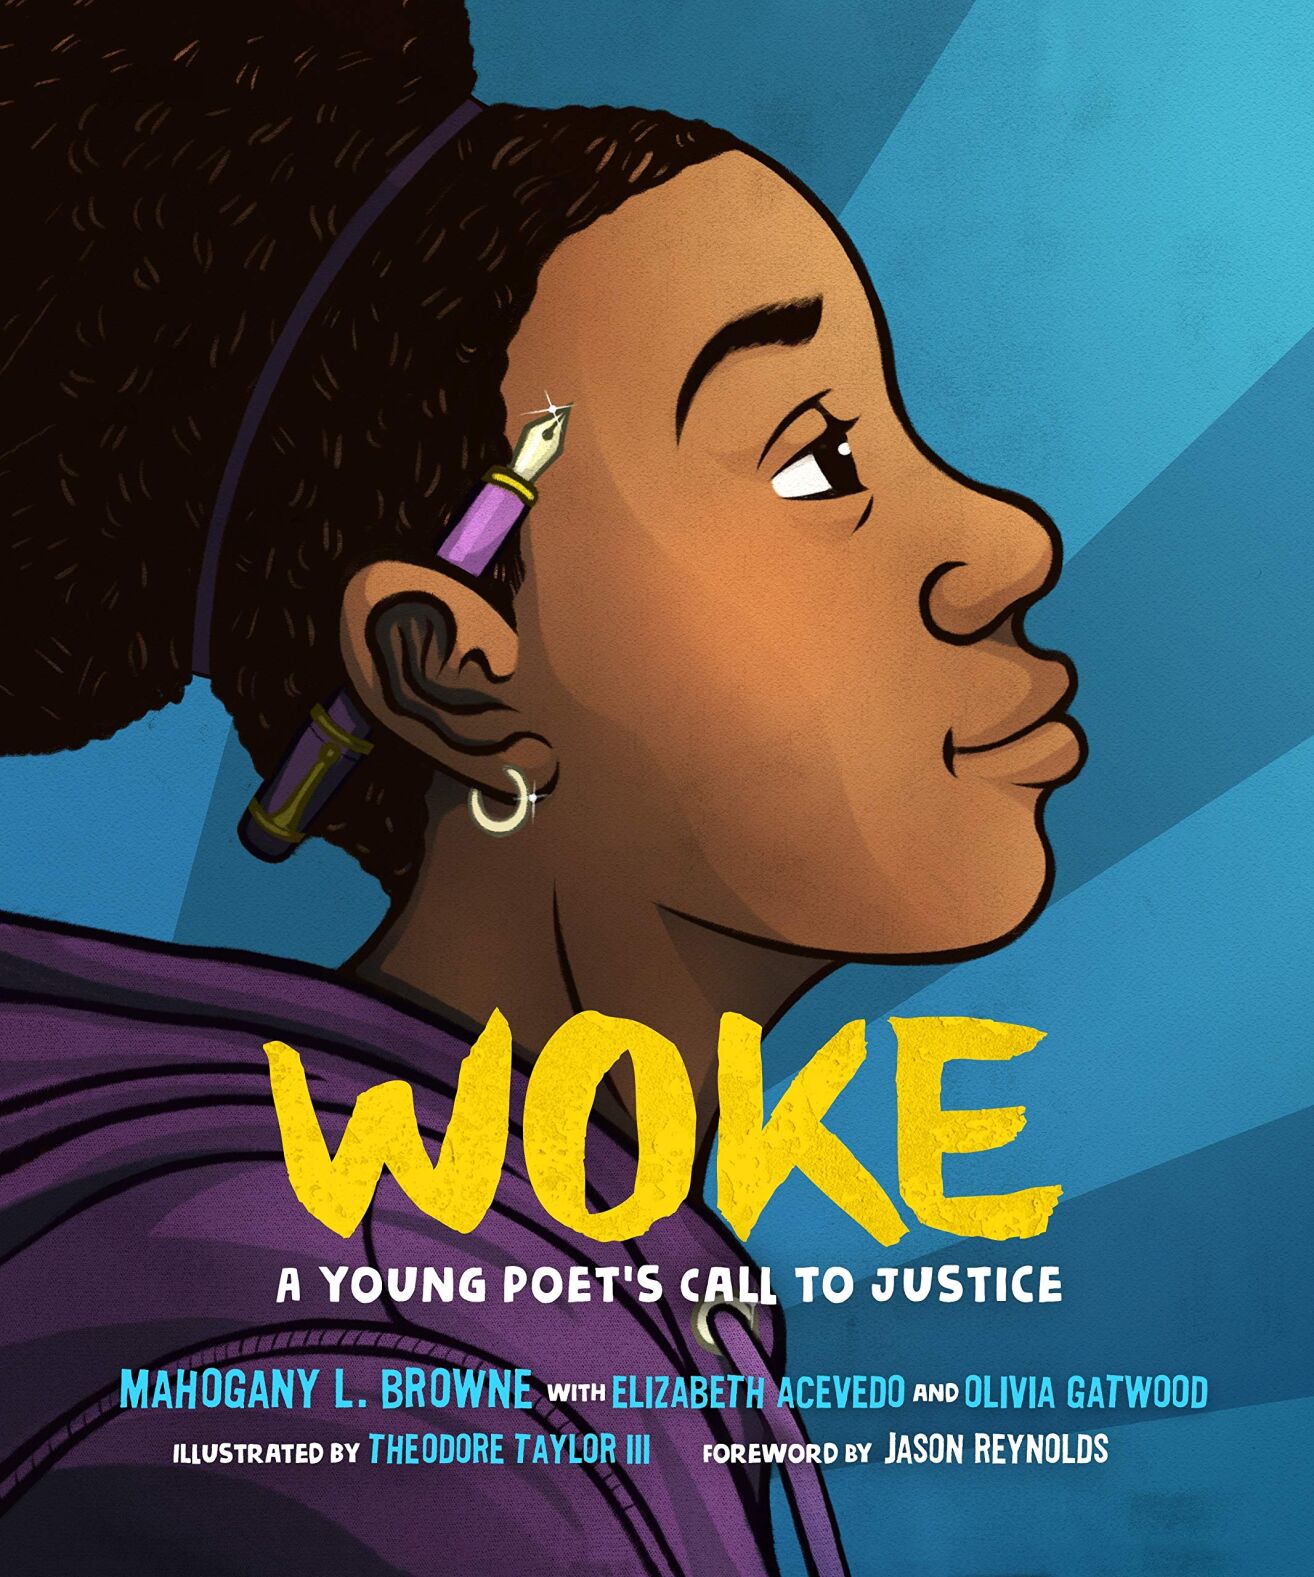 'Woke' is a call to activism for the young Lifestyles